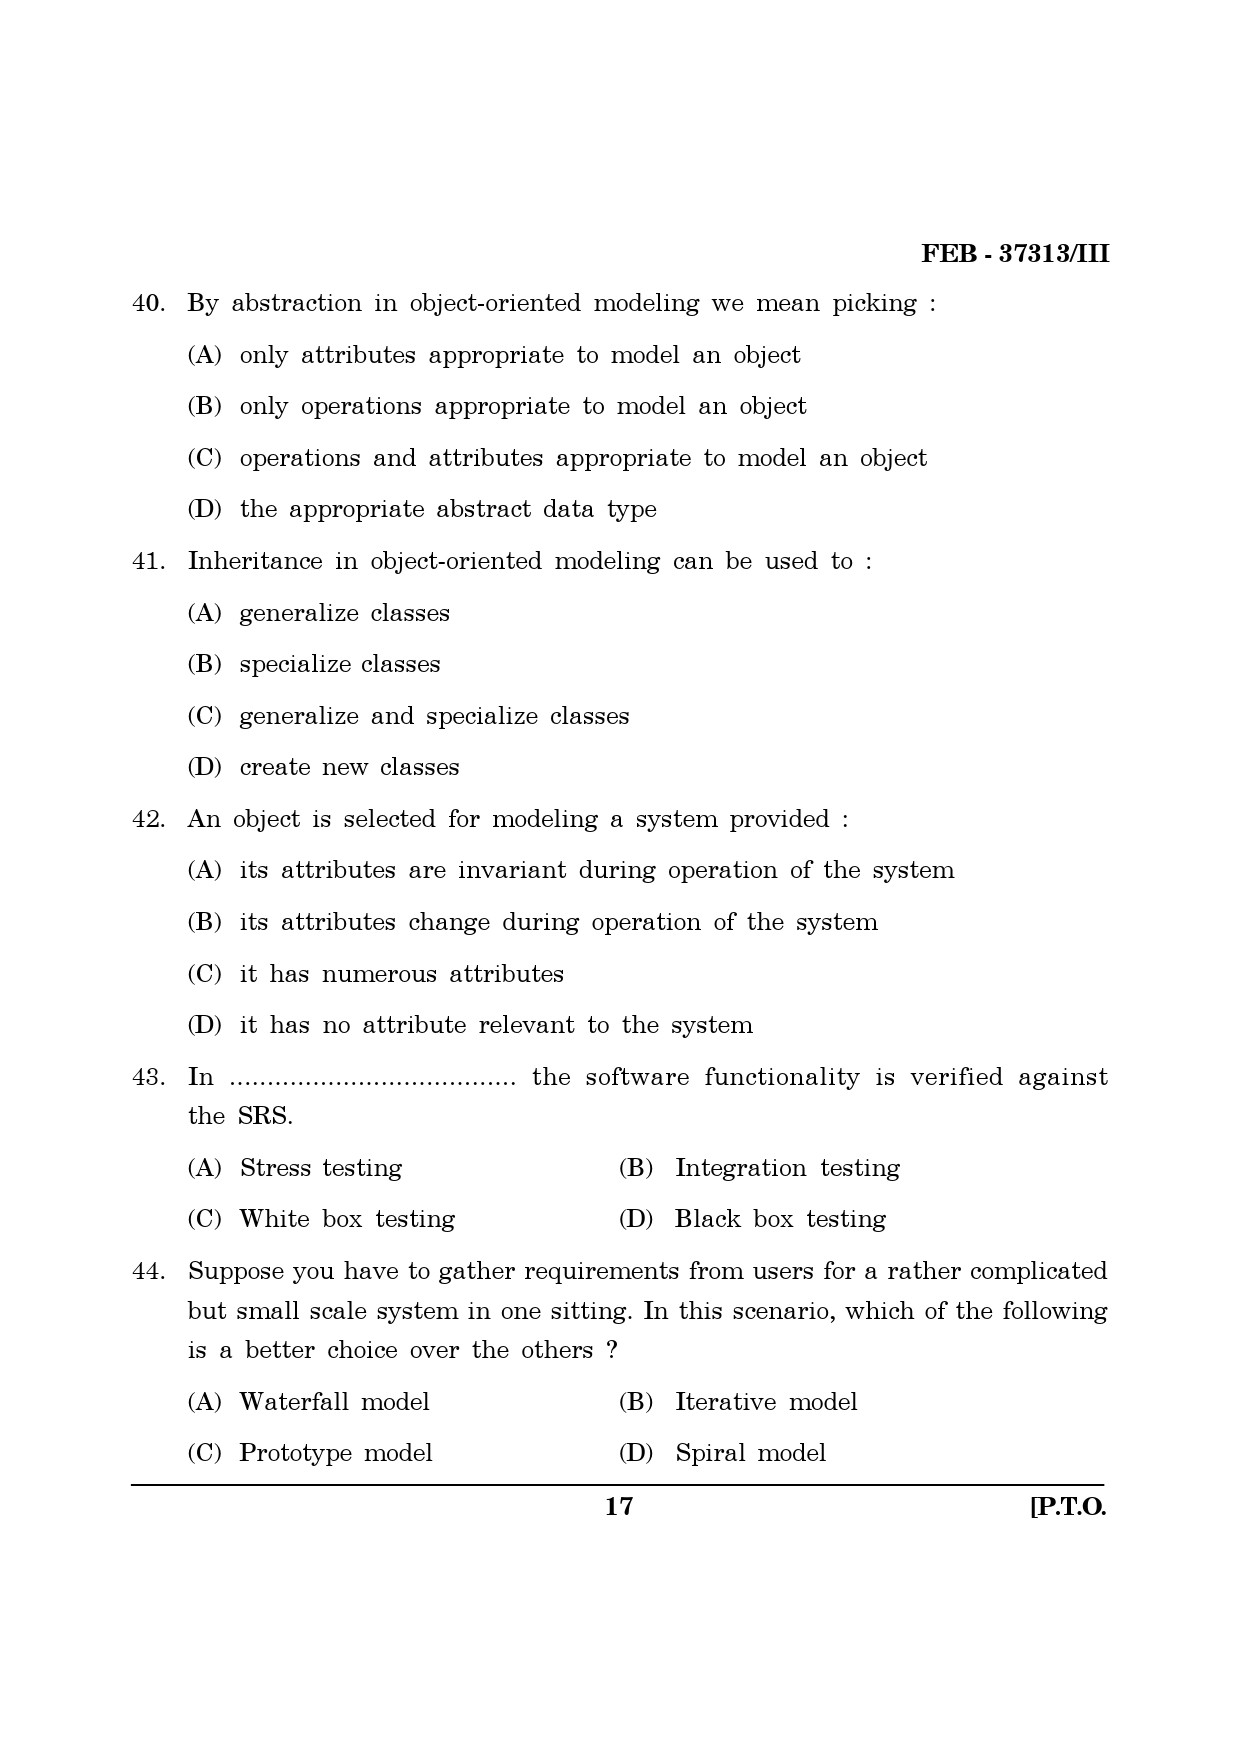 Maharashtra SET Computer Science and Application Question Paper III February 2013 17